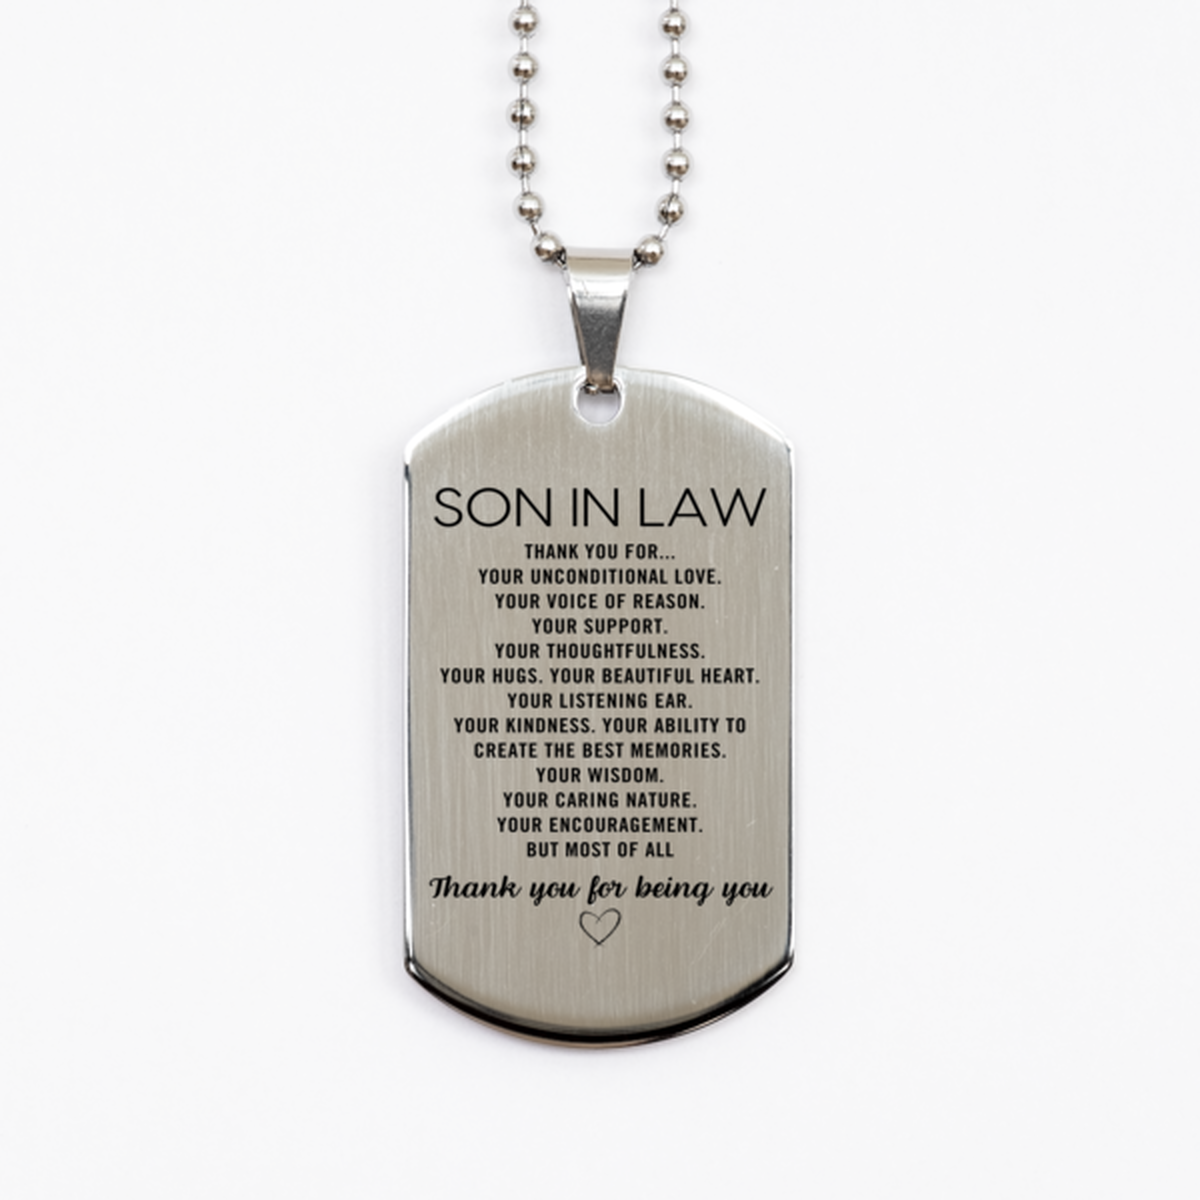 Son In Law Silver Dog Tag Custom, Engraved Gifts For Son In Law Christmas Graduation Birthday Gifts for Men Women Son In Law Thank you for Your unconditional love